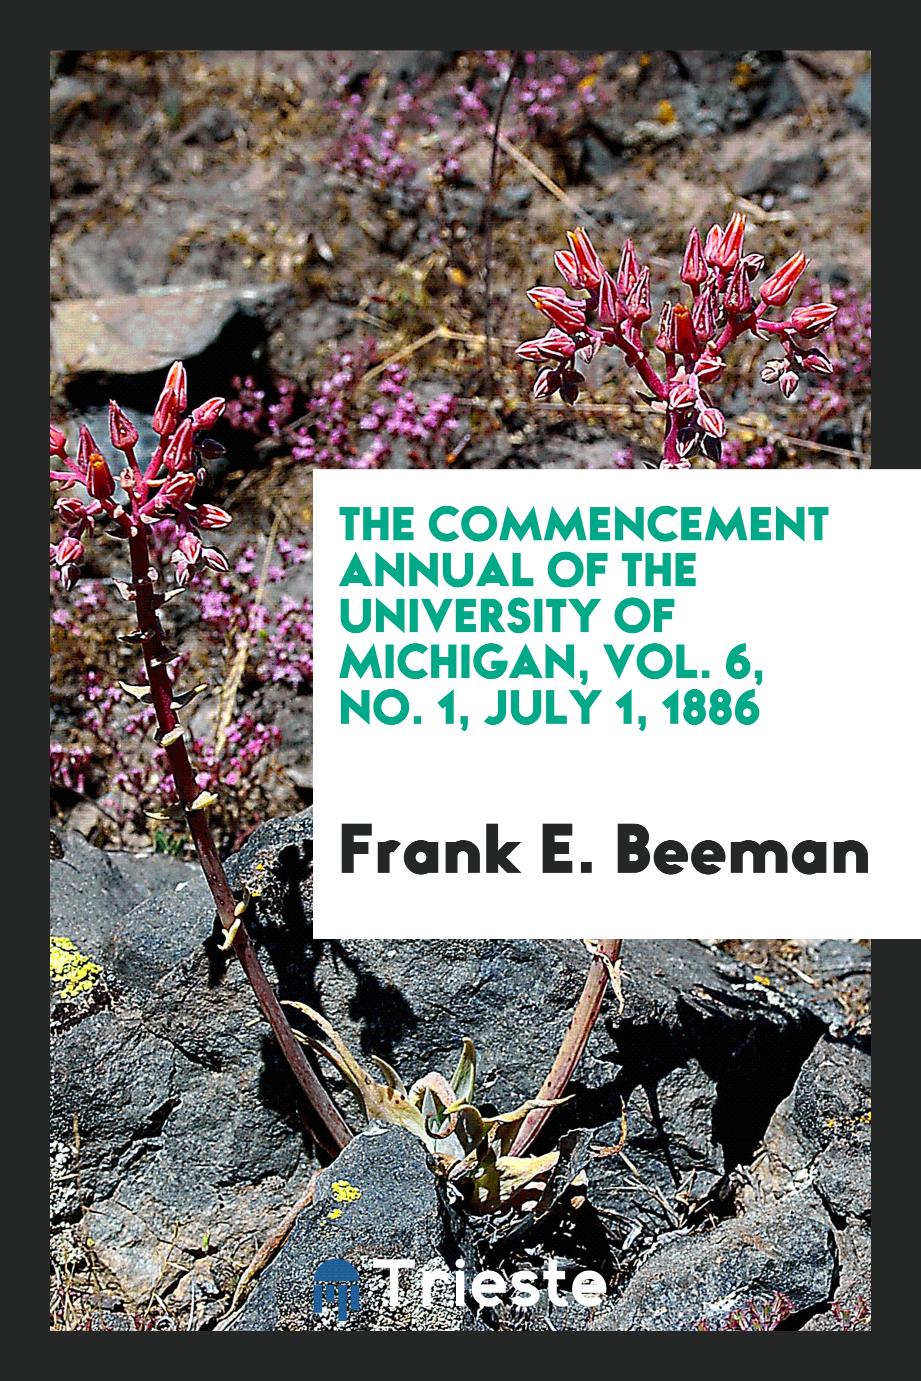 The Commencement Annual of the University of Michigan, Vol. 6, No. 1, July 1, 1886